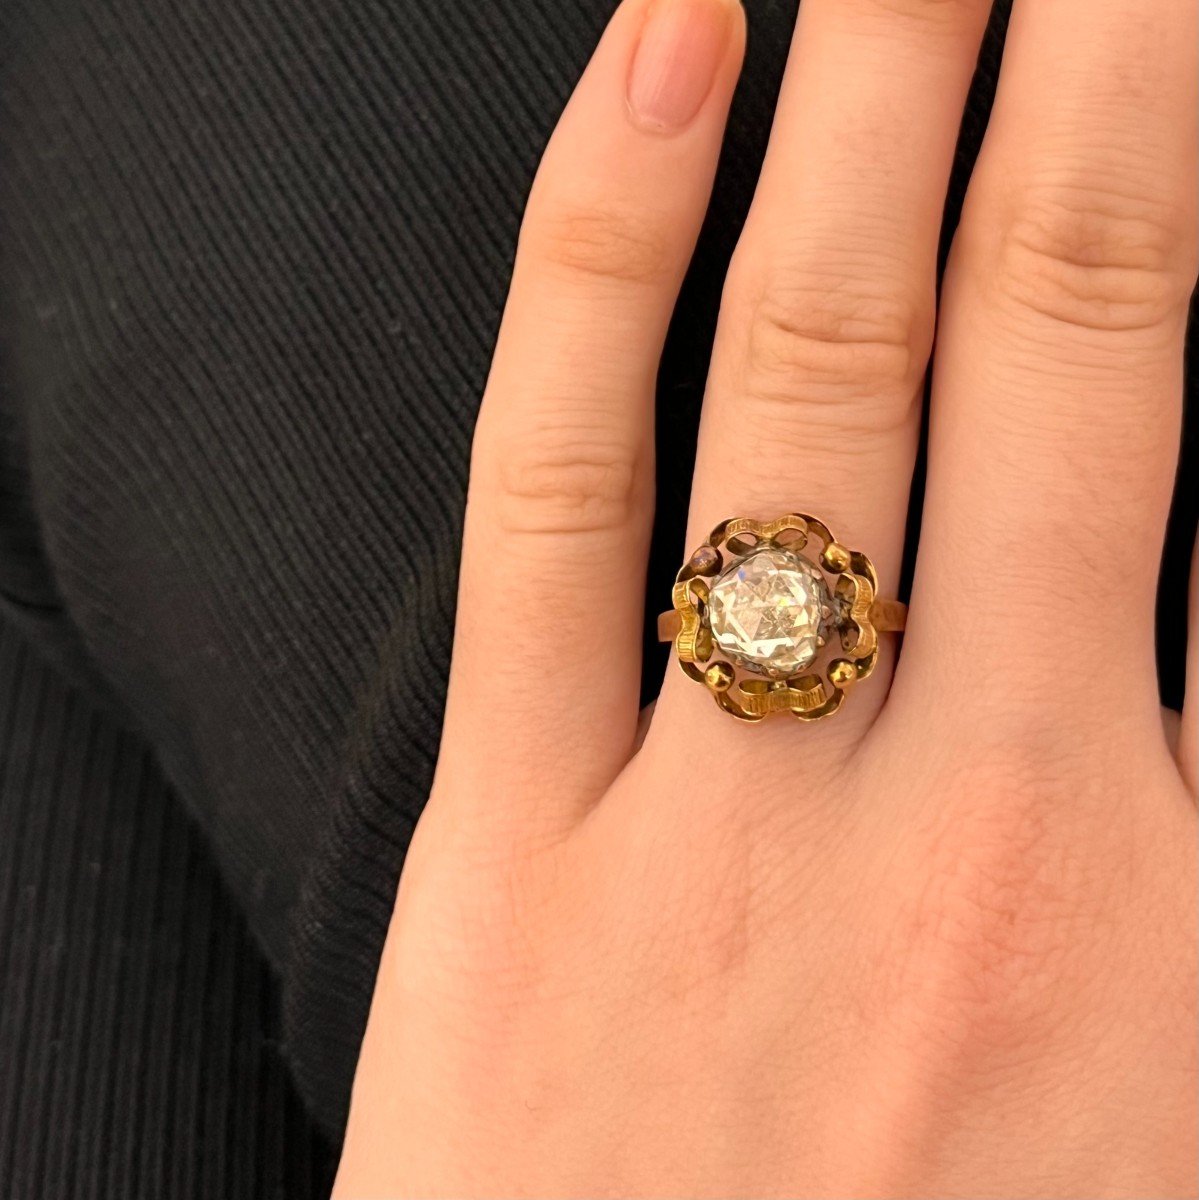 Rose Cut Diamond And 18k Yellow Gold Ring. End Of The 19th Century.-photo-1